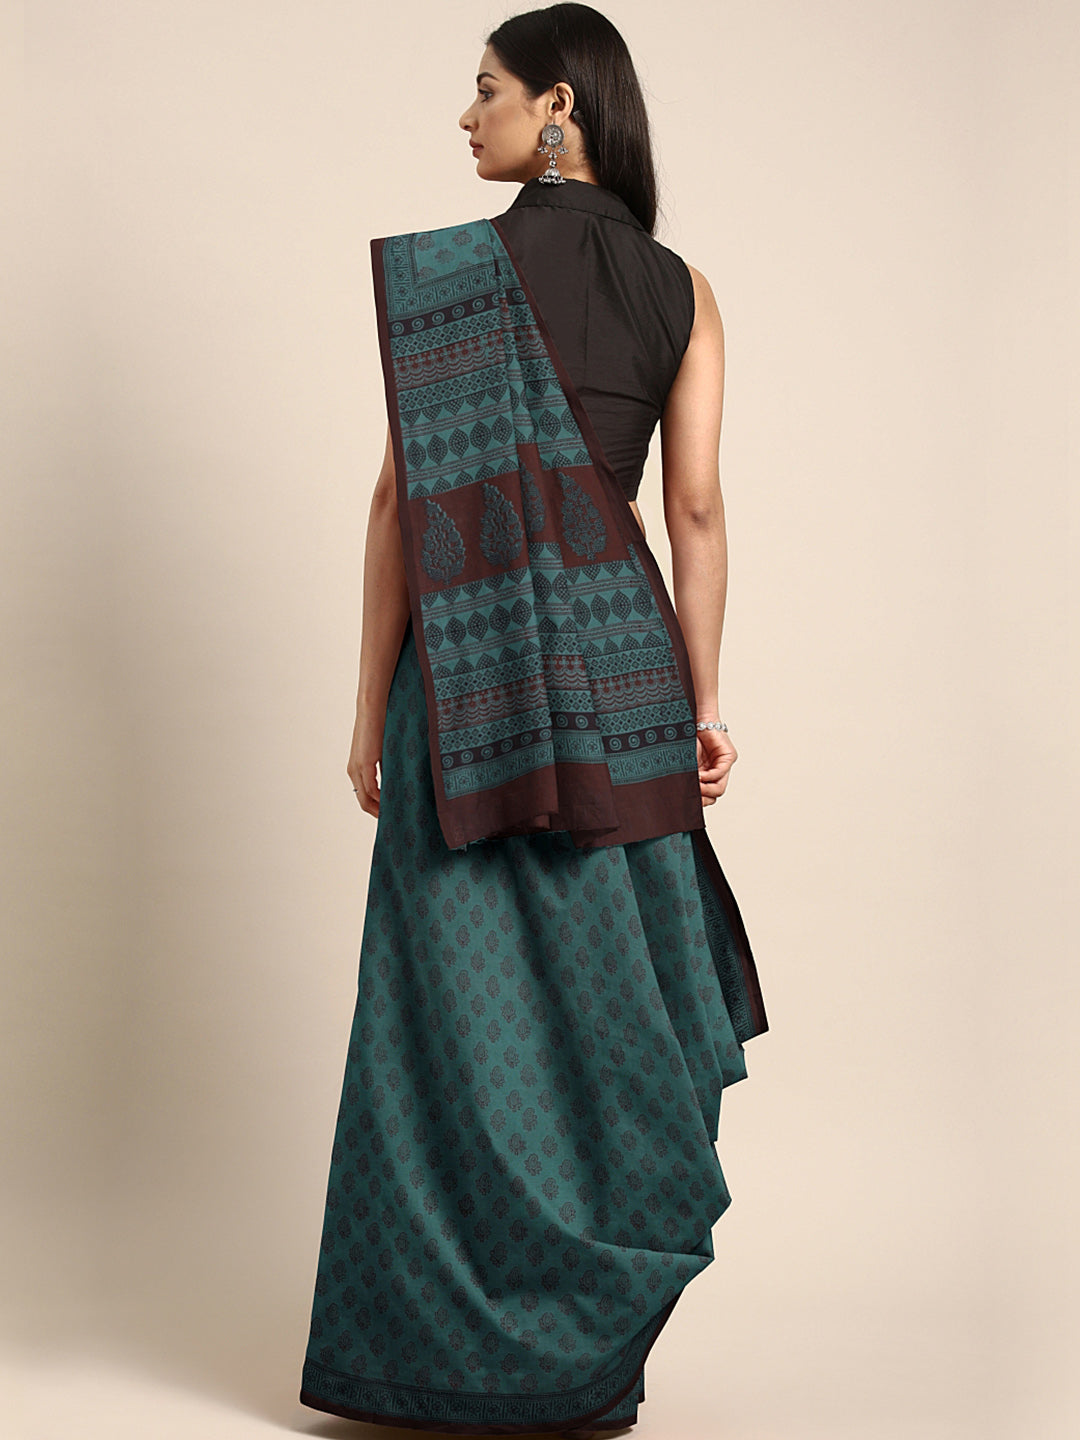 Teal and Black, Kalakari India Teal Blue & Maroon Handblock Print Bagh Saree ZIBASA0104-Saree-Kalakari India-ZIBASA0104-Bagh, Cotton, Geographical Indication, Hand Crafted, Heritage Prints, Natural Dyes, Red, Sarees, Sustainable Fabrics, Woven, Yellow-[Linen,Ethnic,wear,Fashionista,Handloom,Handicraft,Indigo,blockprint,block,print,Cotton,Chanderi,Blue, latest,classy,party,bollywood,trendy,summer,style,traditional,formal,elegant,unique,style,hand,block,print, dabu,booti,gift,present,glamorous,aff